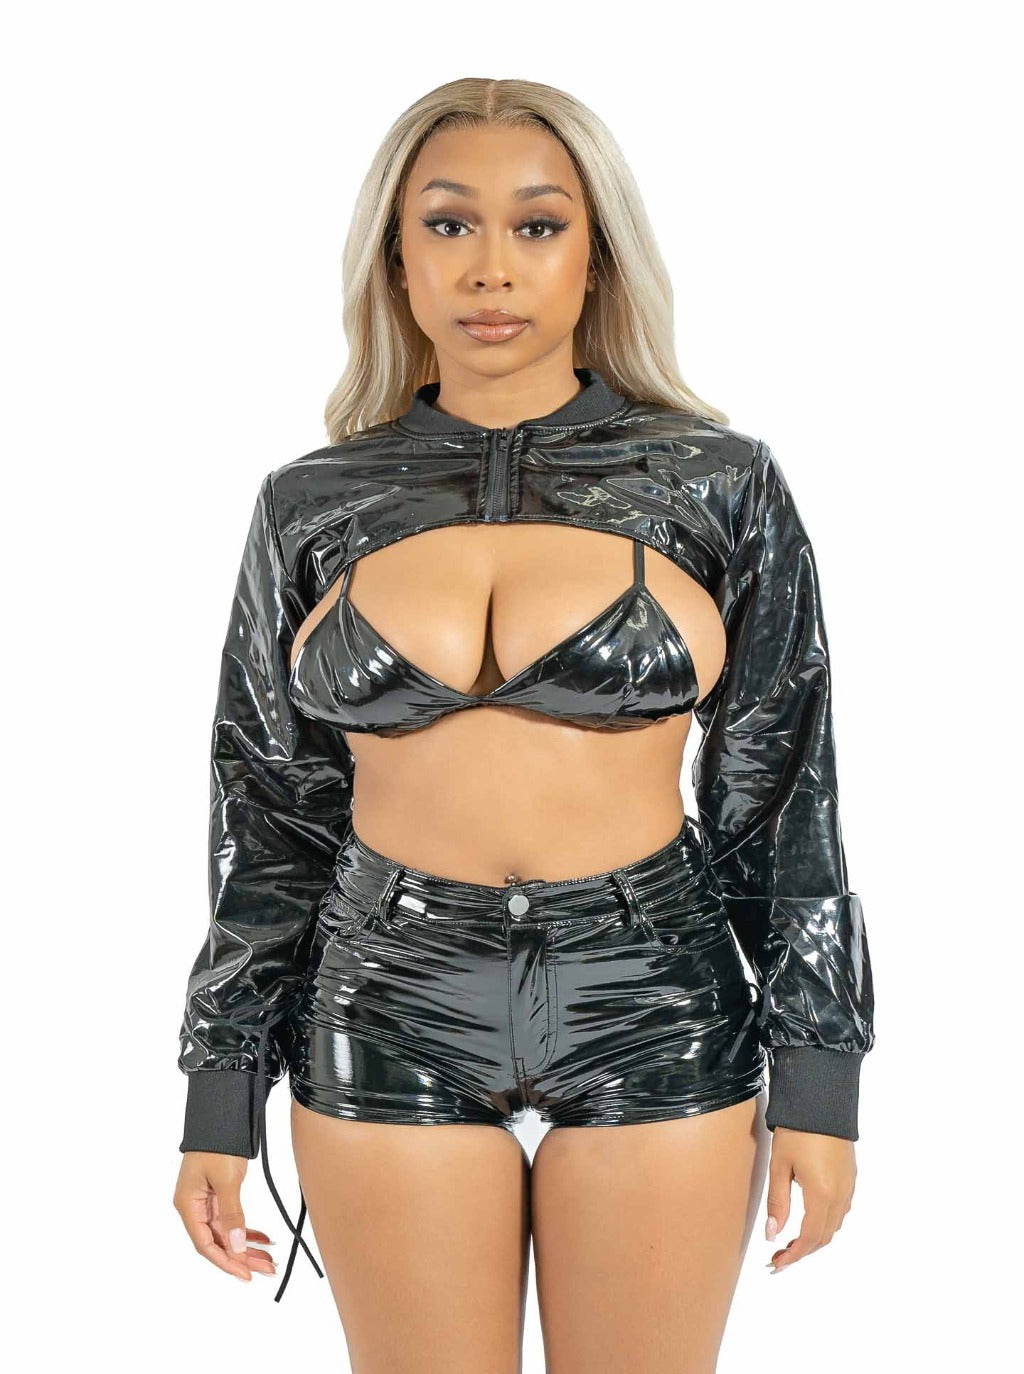 Show Out Leather Set